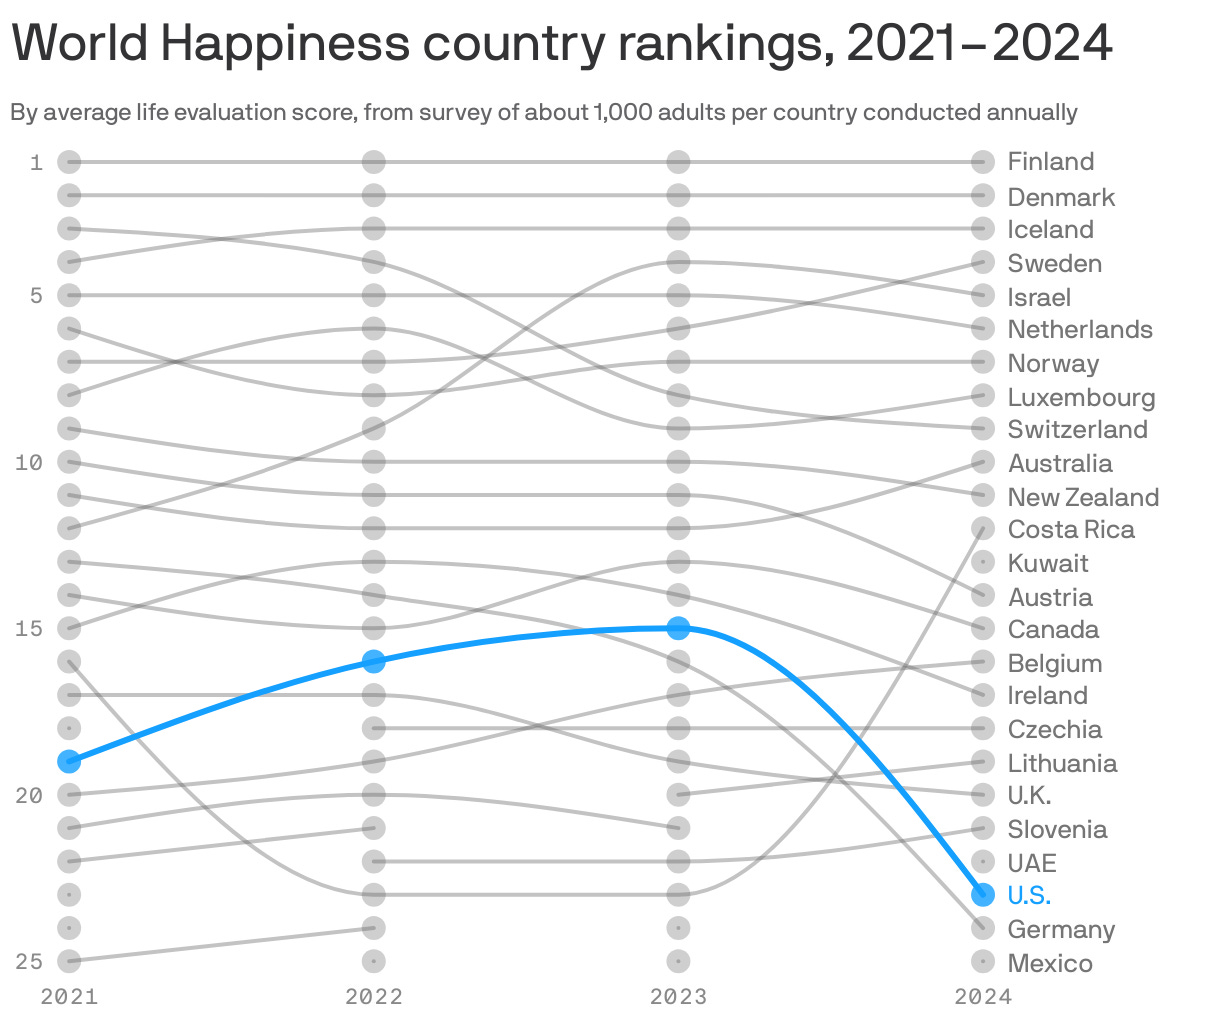 5 Lessons from the World's Biggest Happiness Study